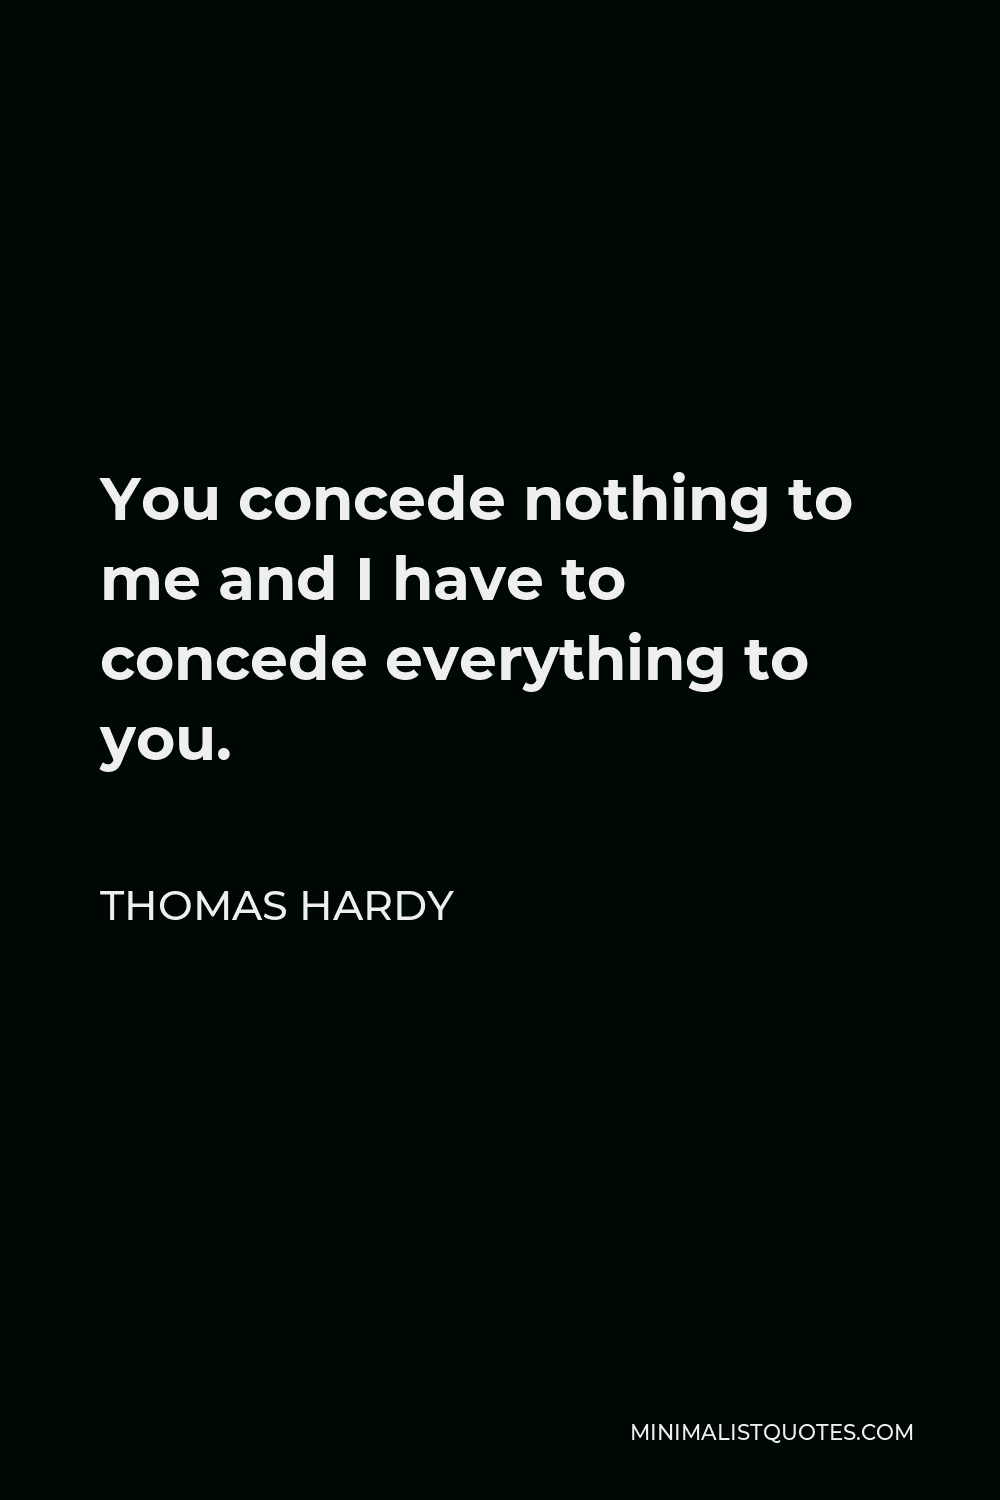 Thomas Hardy Quote - You concede nothing to me and I have to concede everything to you.